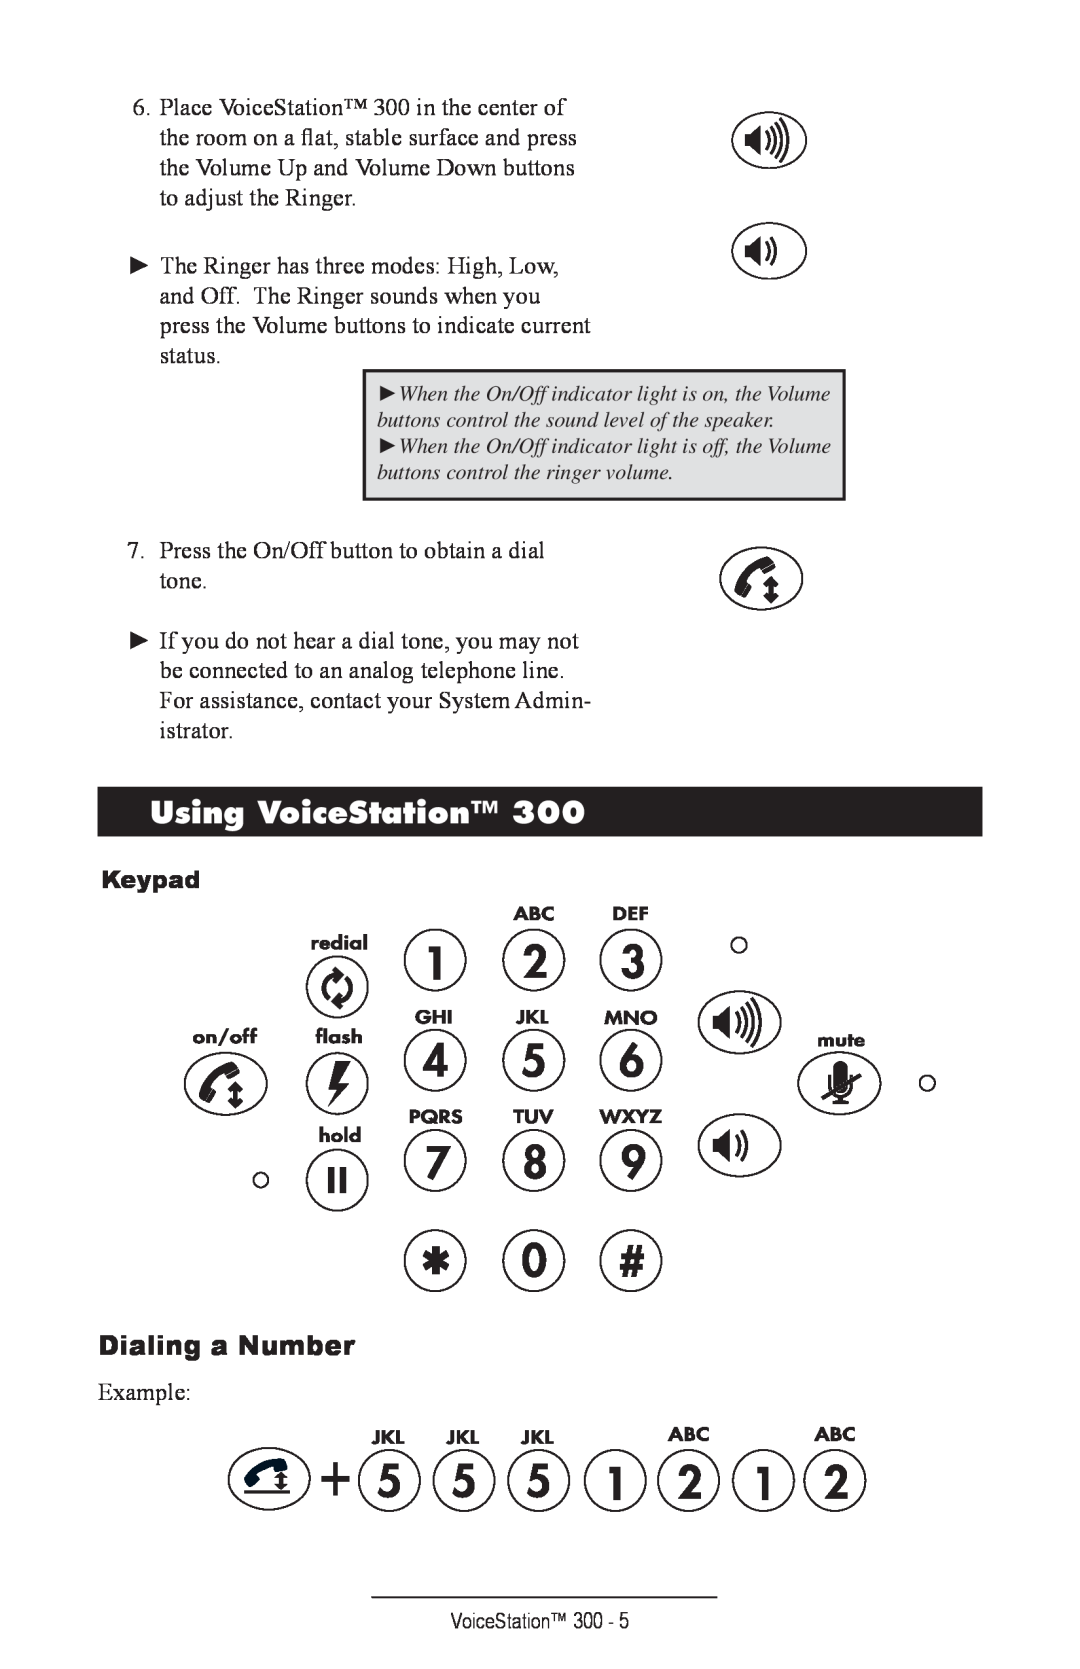 Polycom TM300 manual Using VoiceStation, Dialing a Number, Keypad 